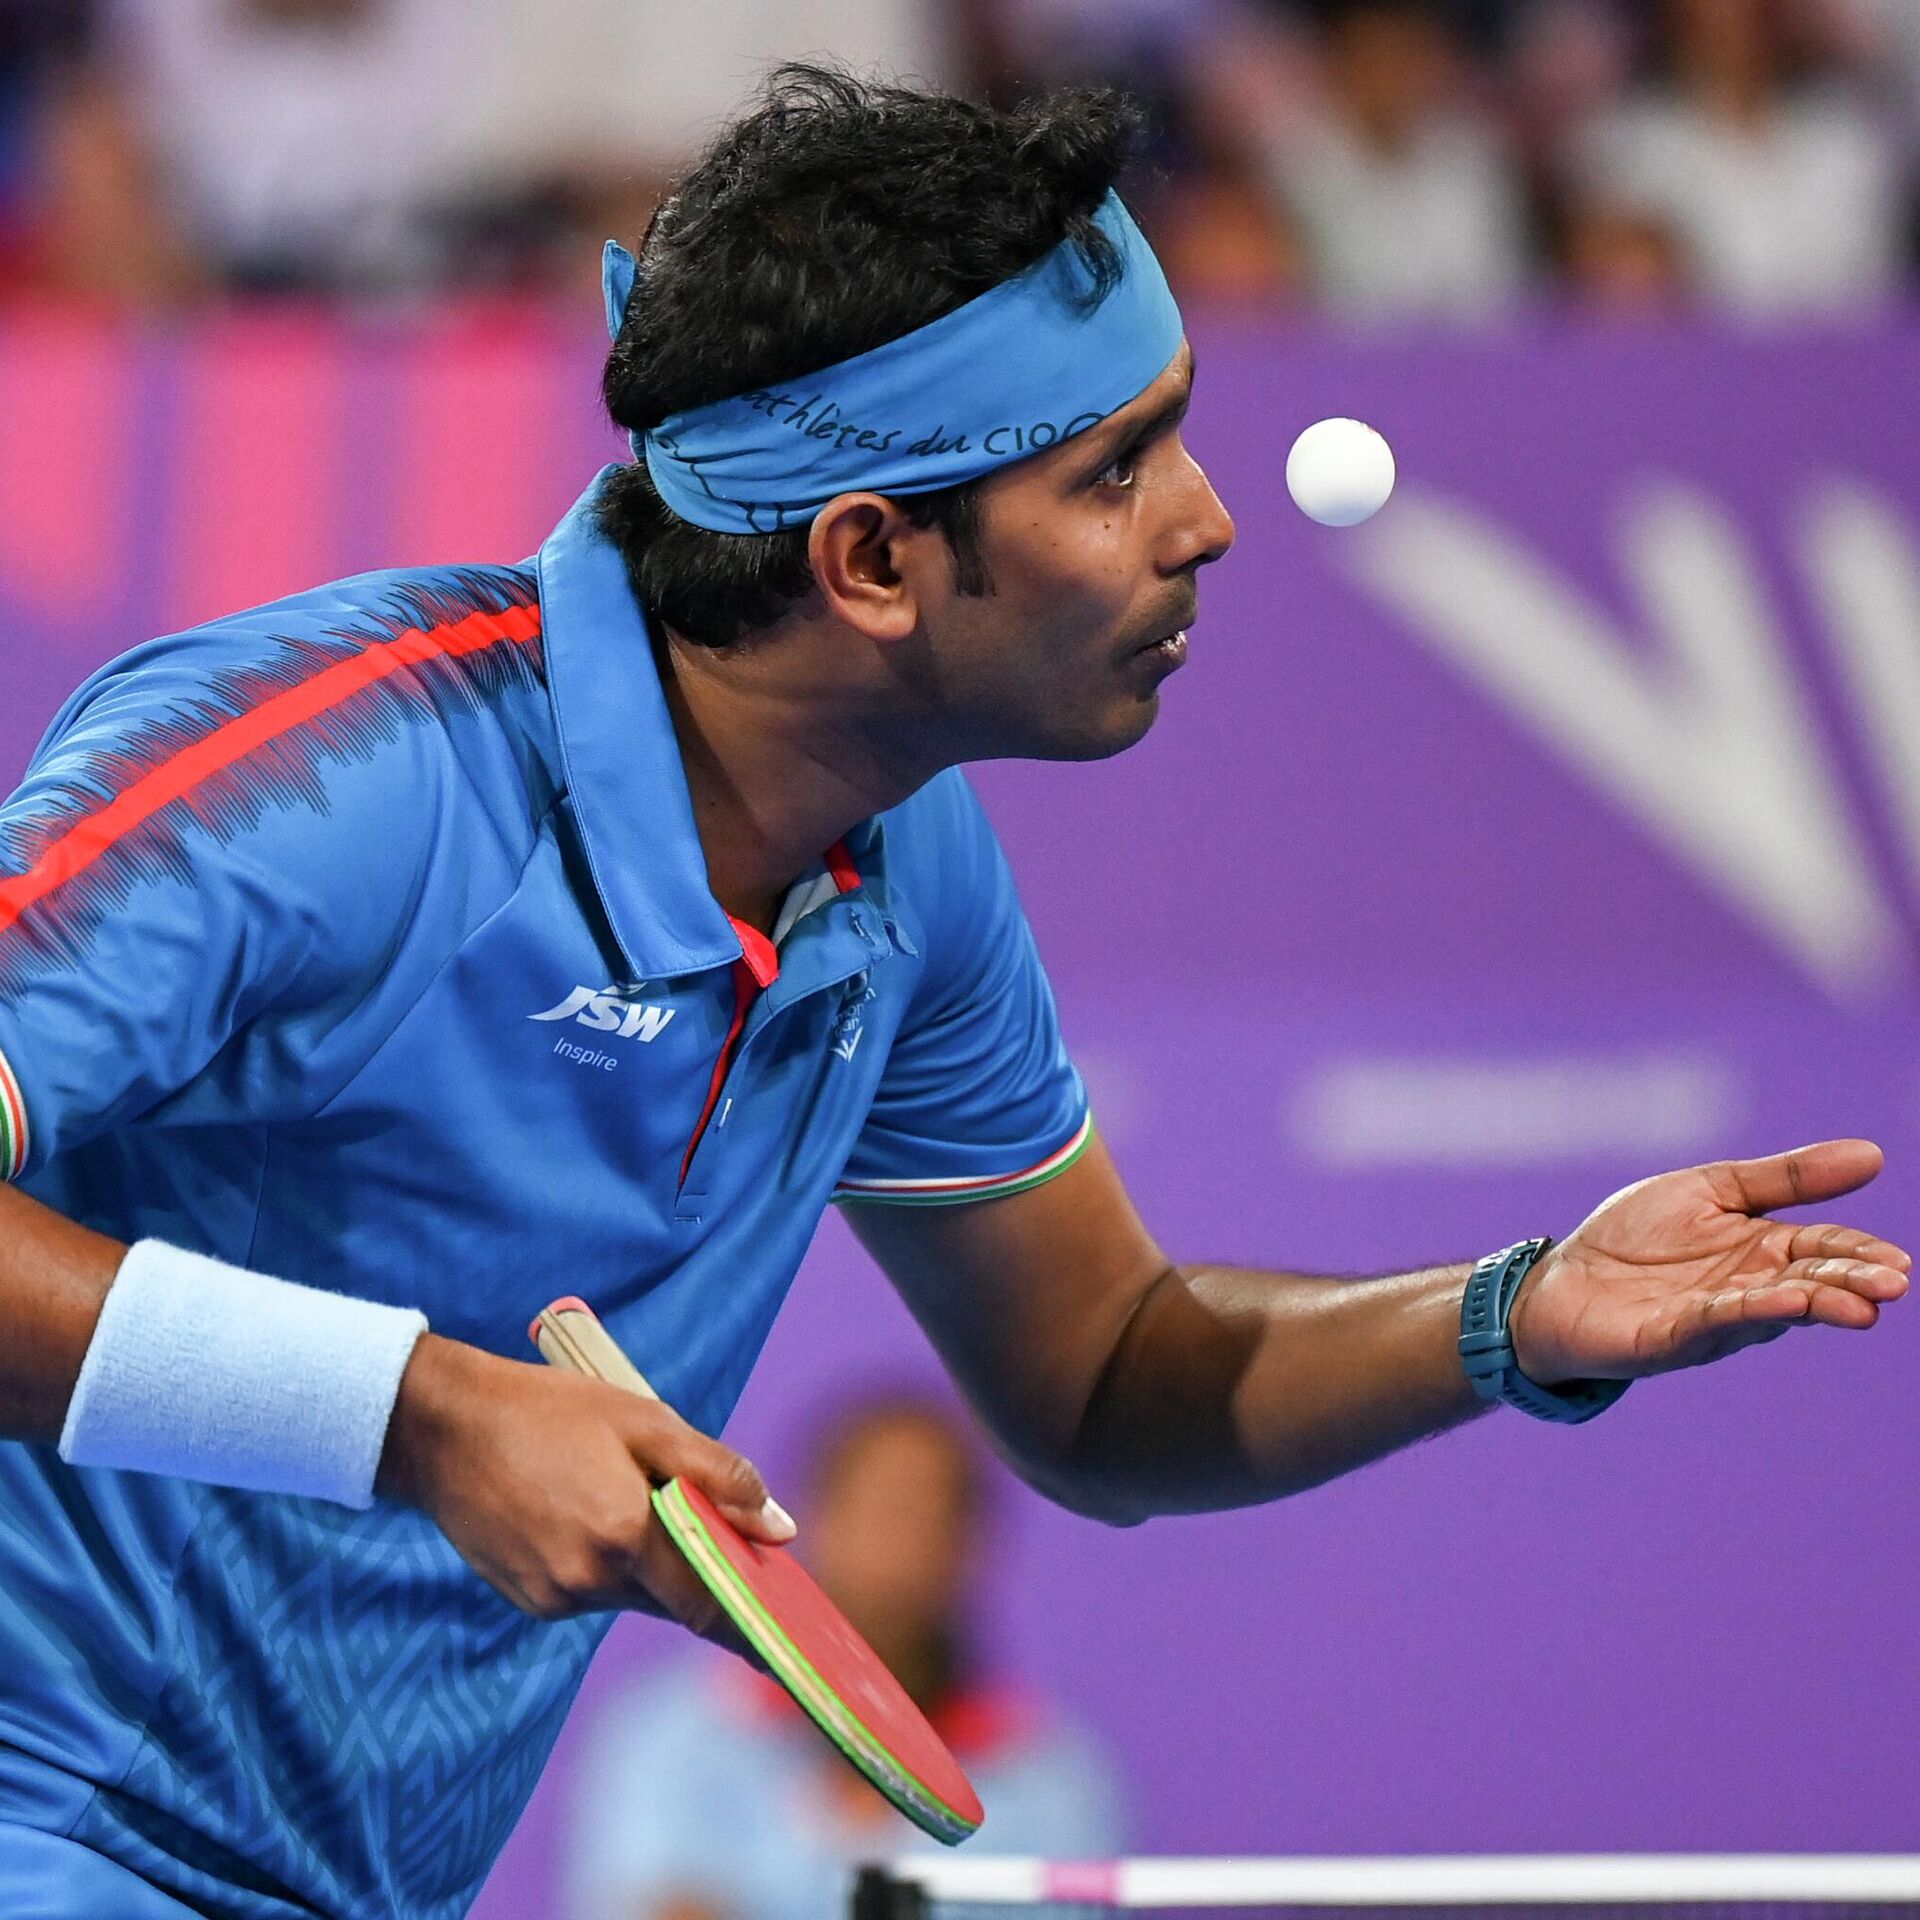 Indias Top-Ranked Table Tennis Star and CWG Gold Medalist Targets Olympic Glory in 2024